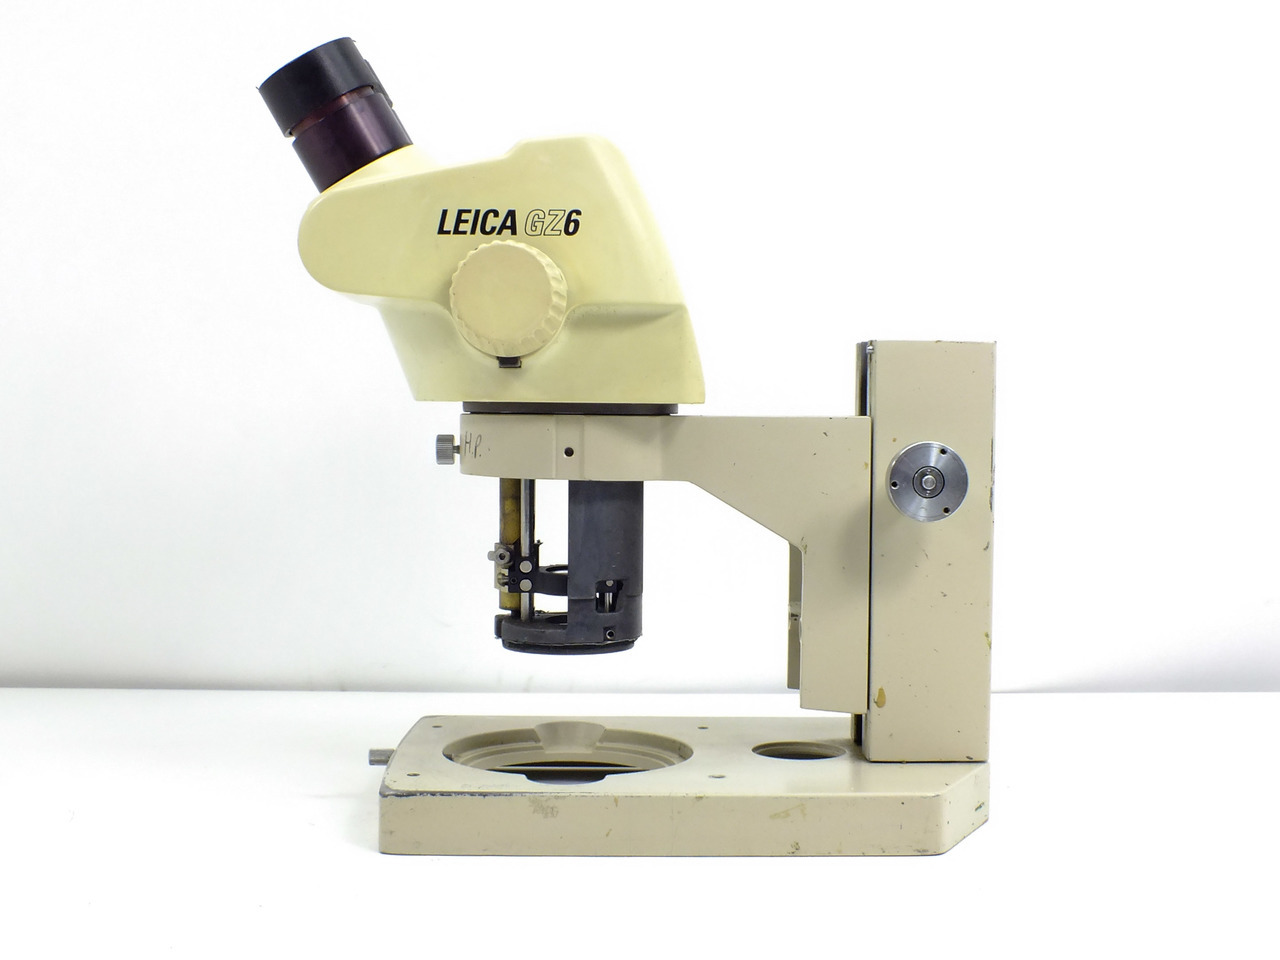 leica-gz6-0.67x-4x-microscope-head-with-focus-block-as-is-for-partsrepair-6.40__24391.1490078848